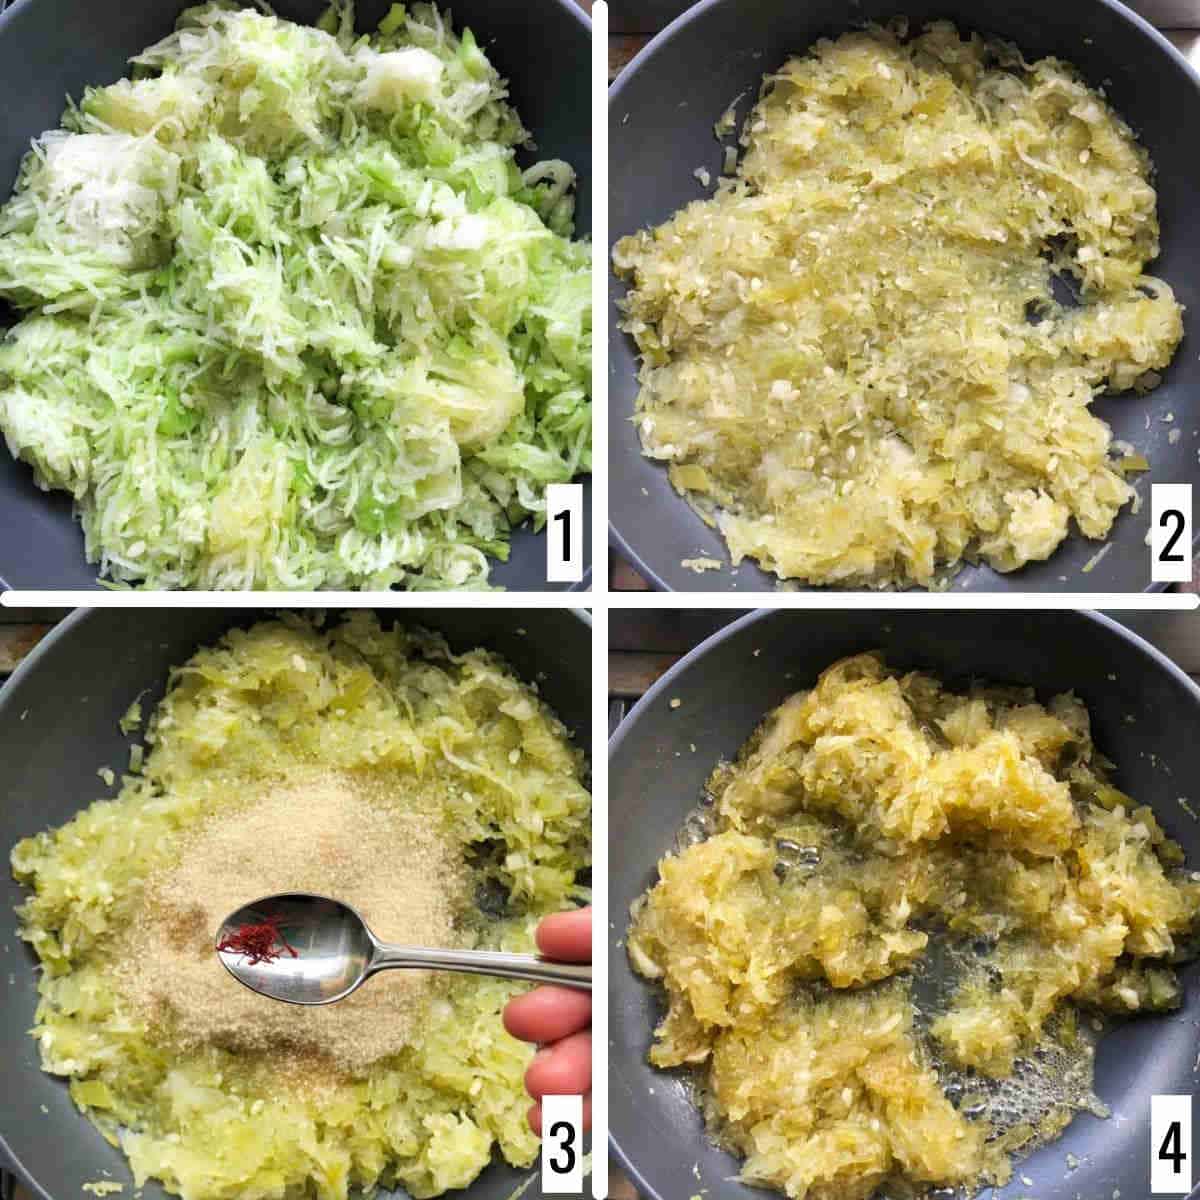 A 4-step collage showing the sauteing of ash goard.